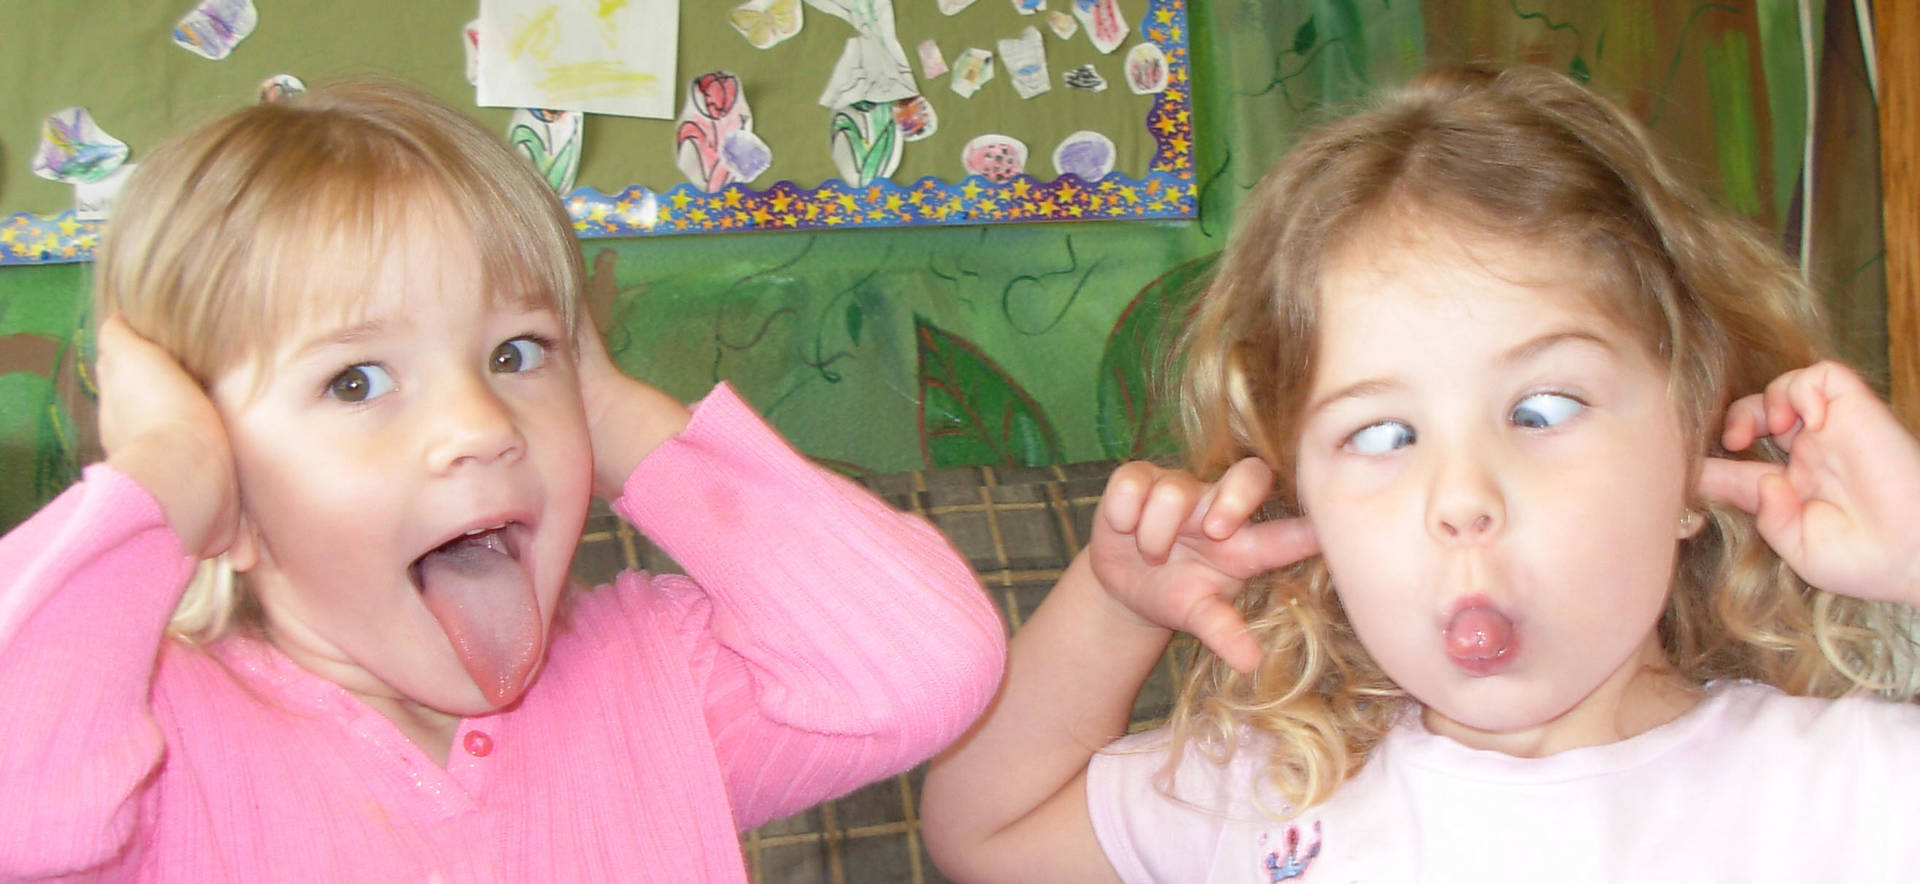 Silly Children Funny Faces Wallpaper